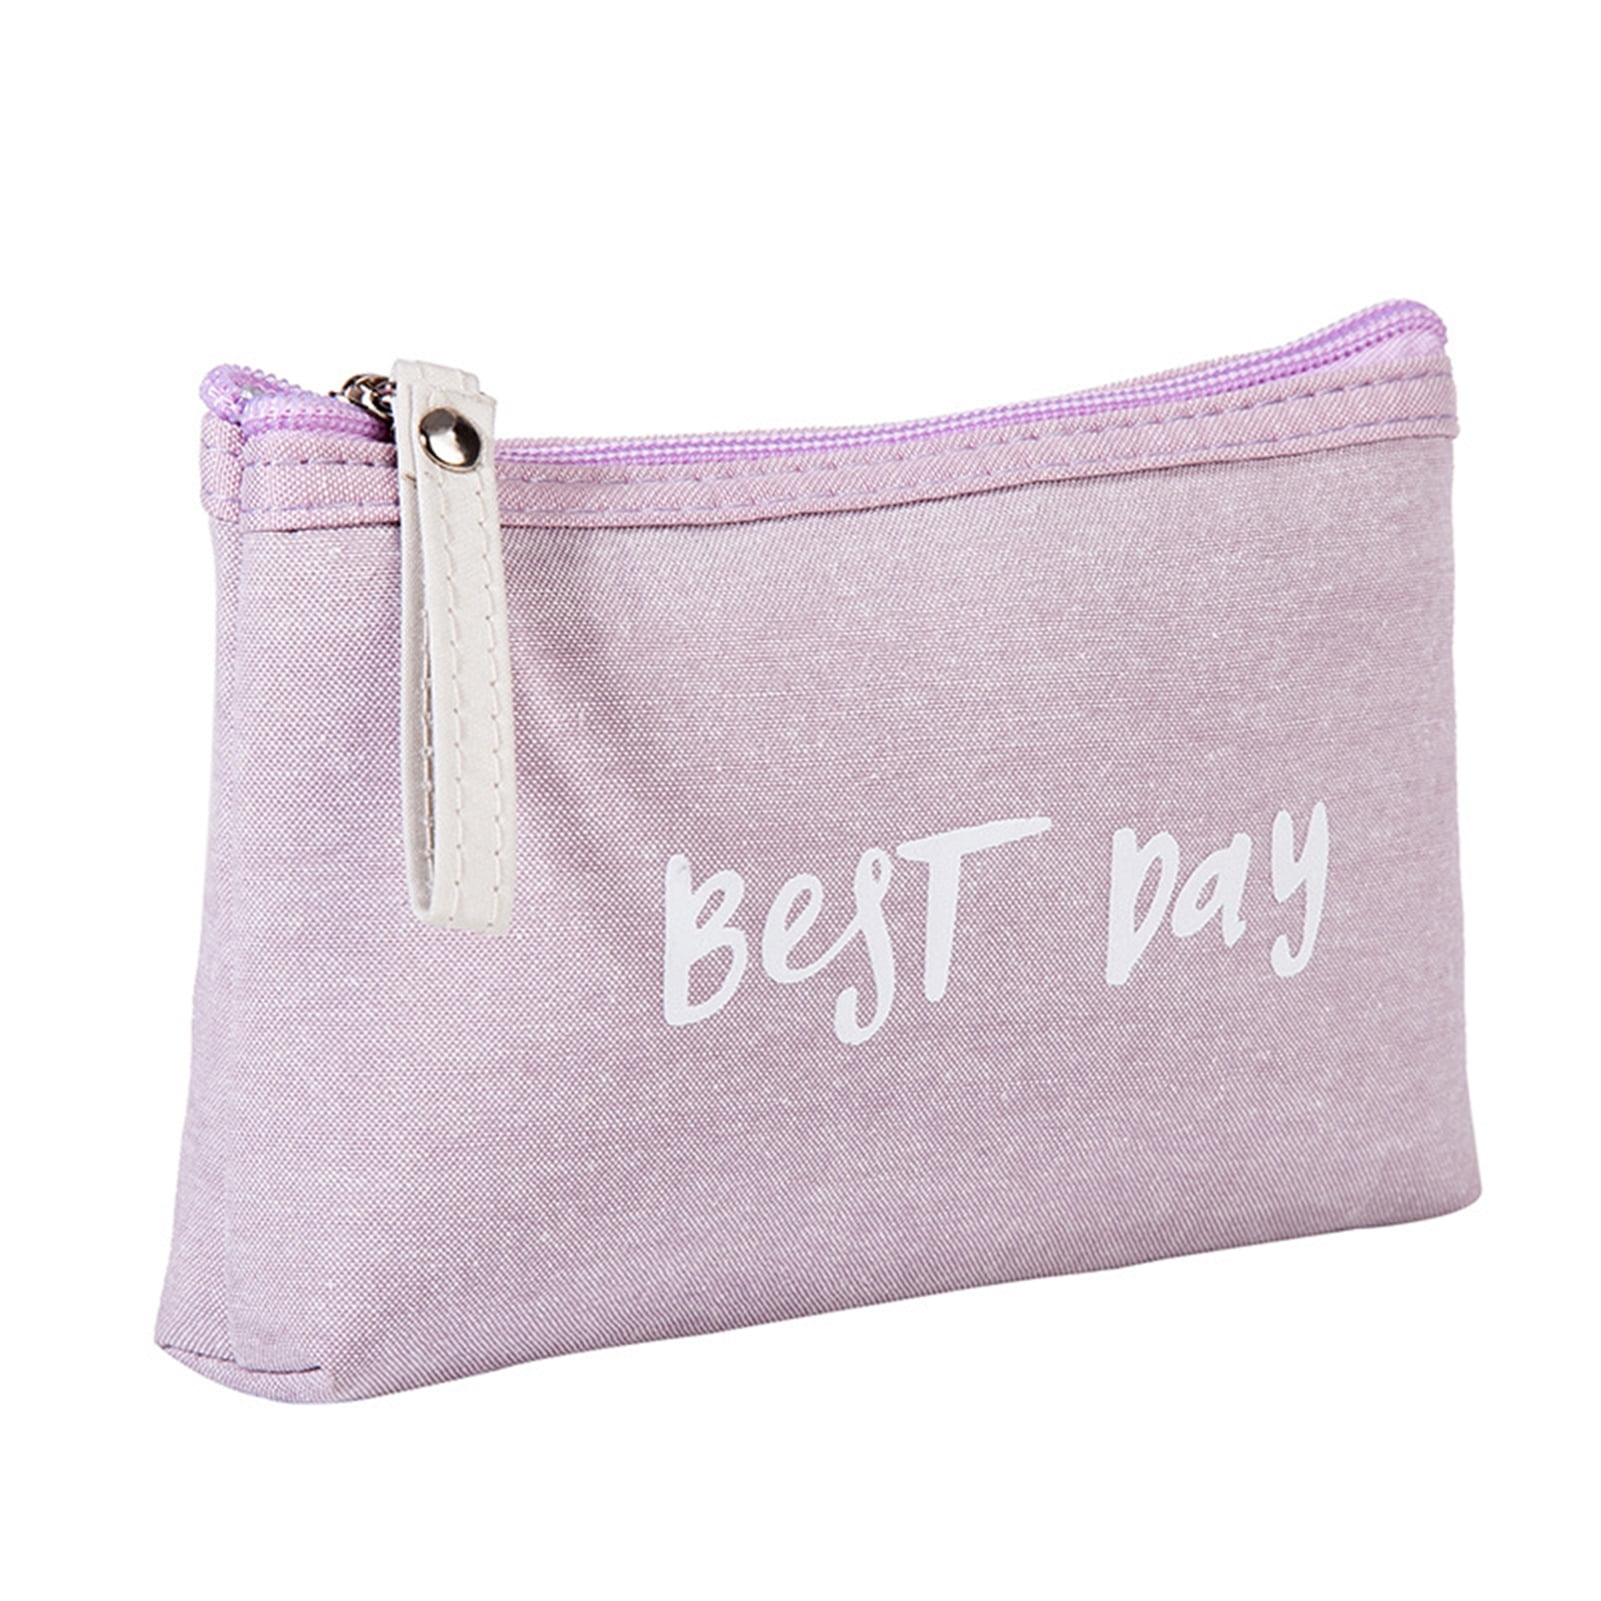 Littledesire Cute Travel Pouch Zipper Cosmetic Mini Bag, Bags & Wallets,  Travel & Makeup Pouches Free Delivery India.